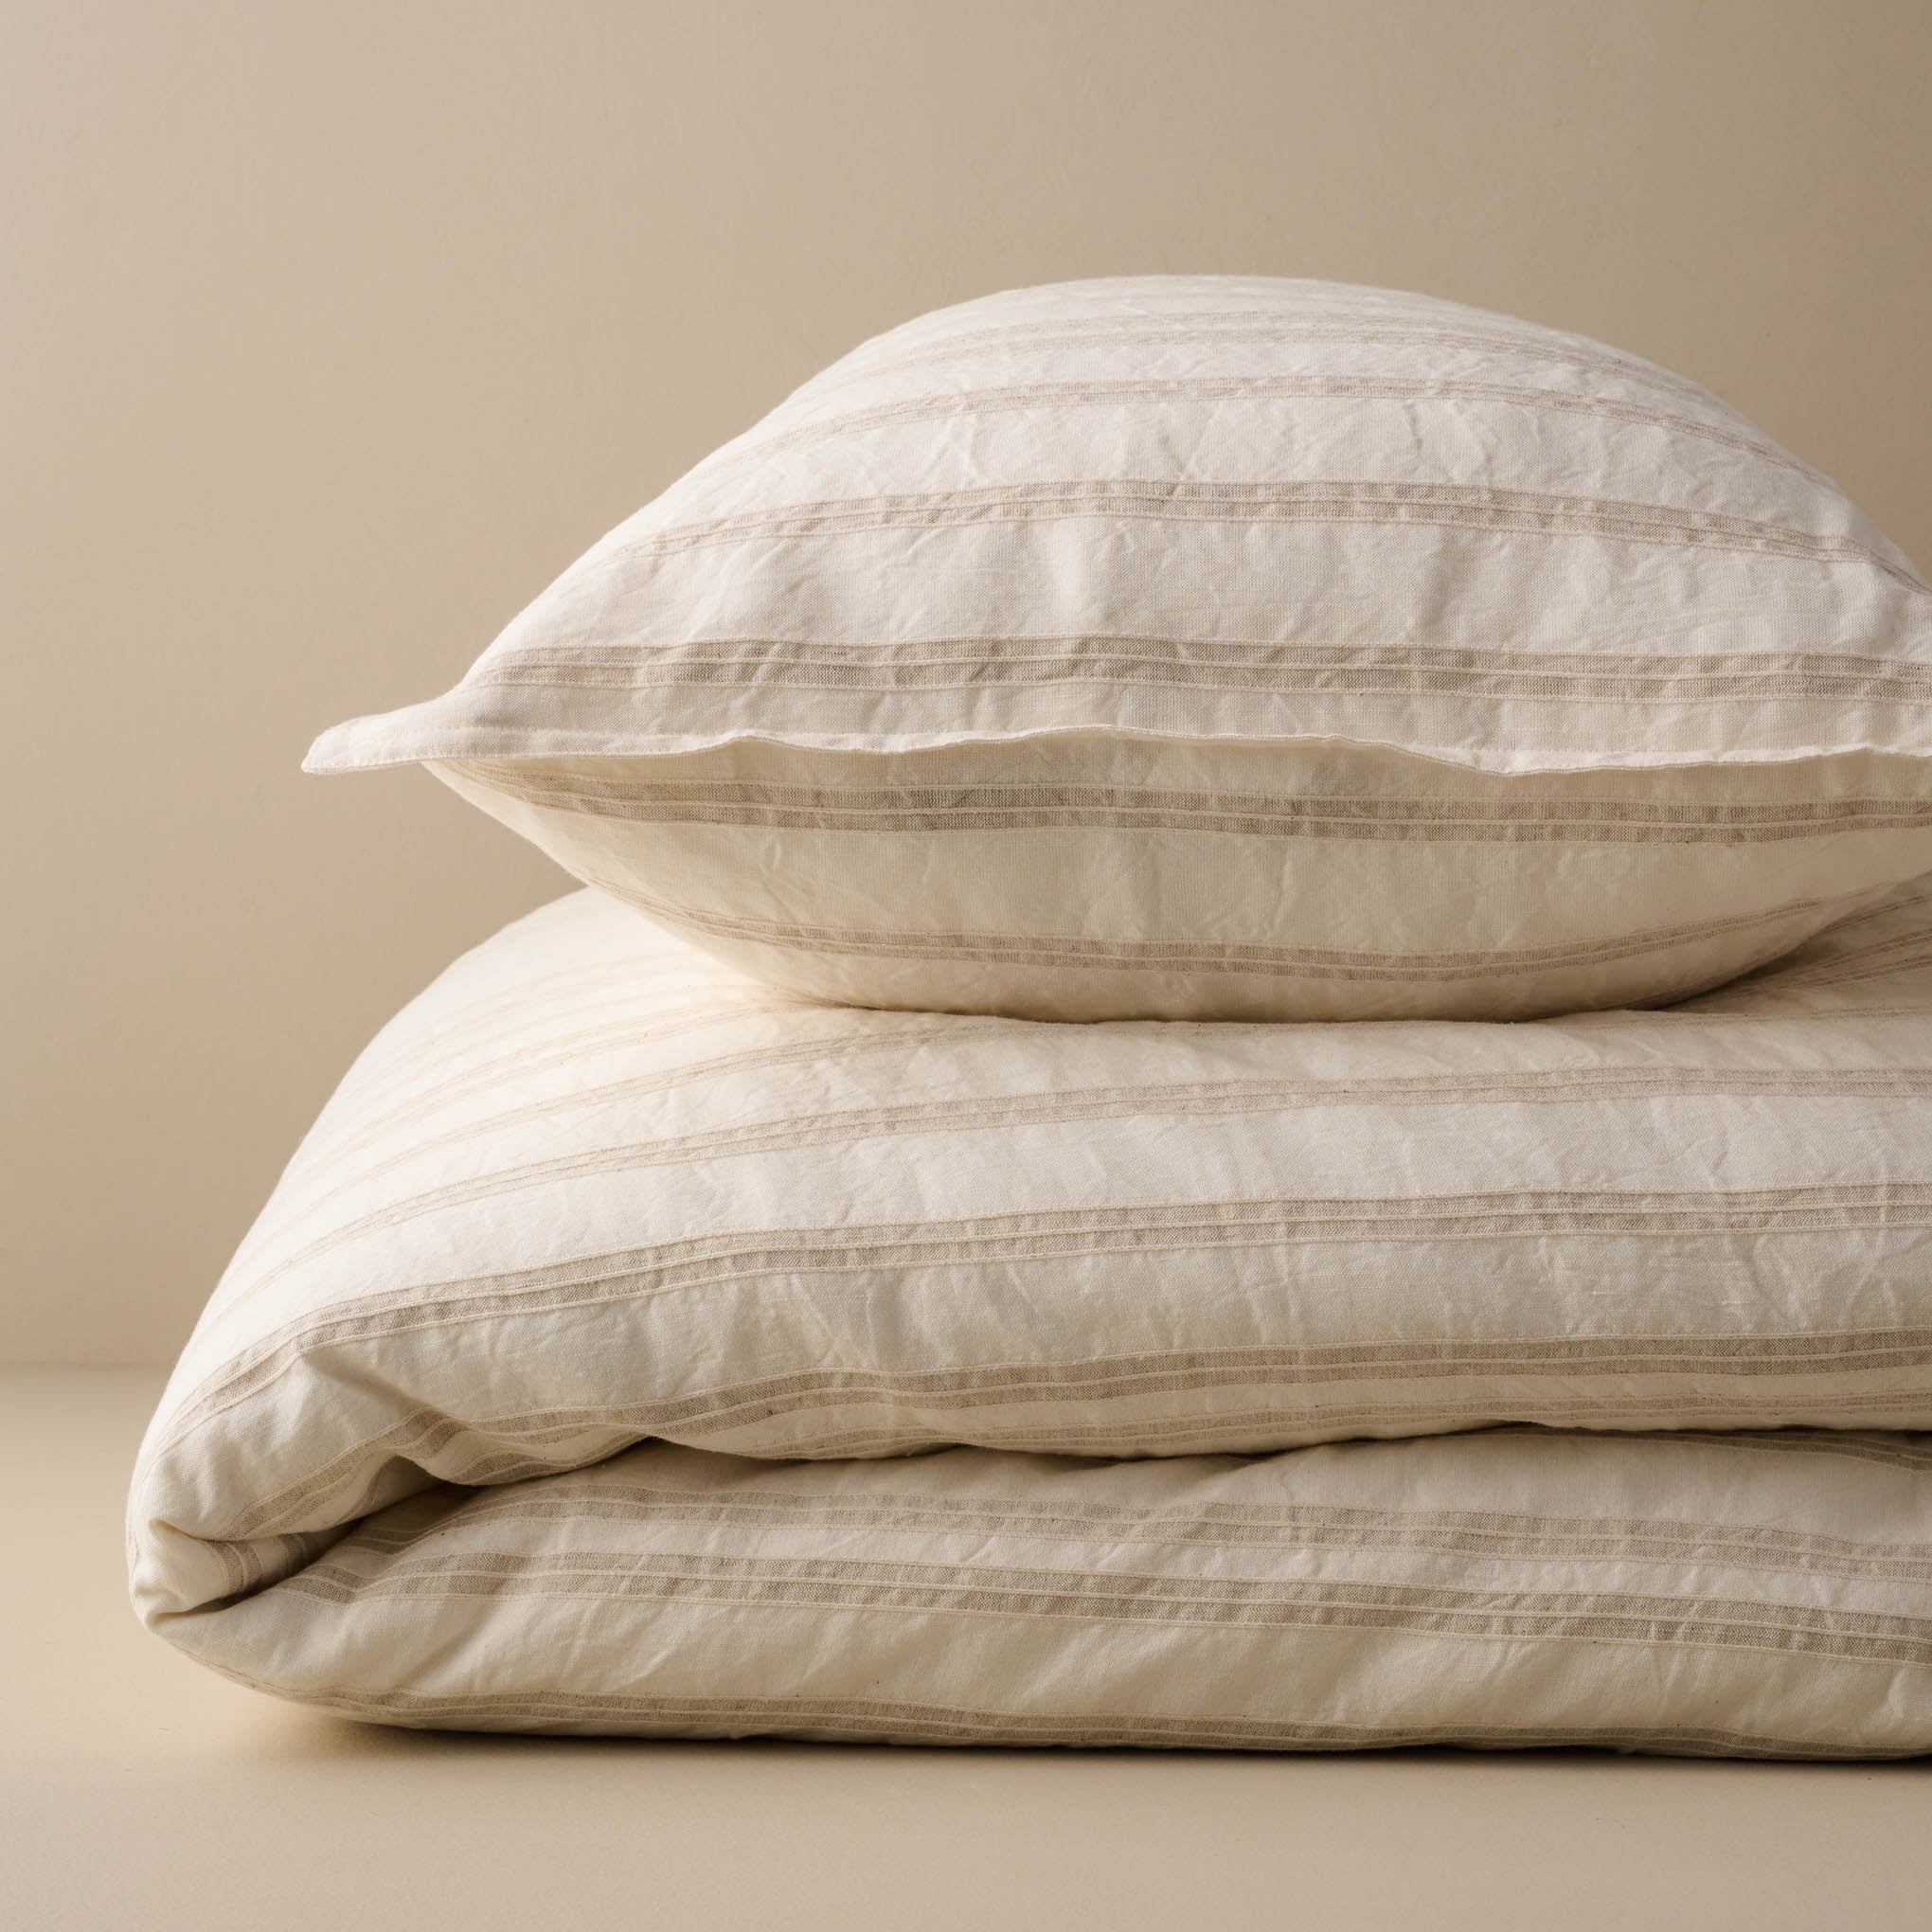 Folded Embroidered Oatmeal Stripe Linen Cotton Duvet and Pillow Sham On sale with items ranging from $158.40 to $198.40, discounted from $198.00 to $248.00